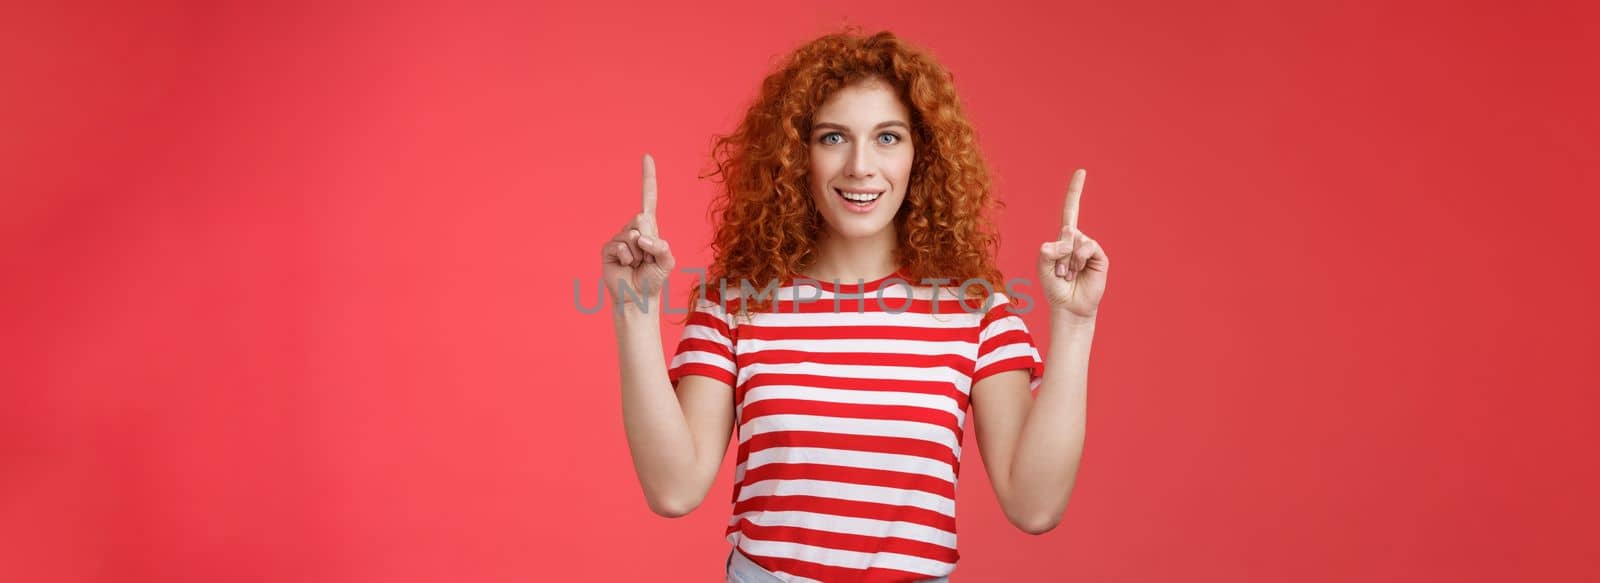 Lifestyle. Excited good-looking cheeky redhead ginger girl curly natural hair pointing raised index fingers up smiling impressed thrilled advising store directing promo advertising awesome haircare product.